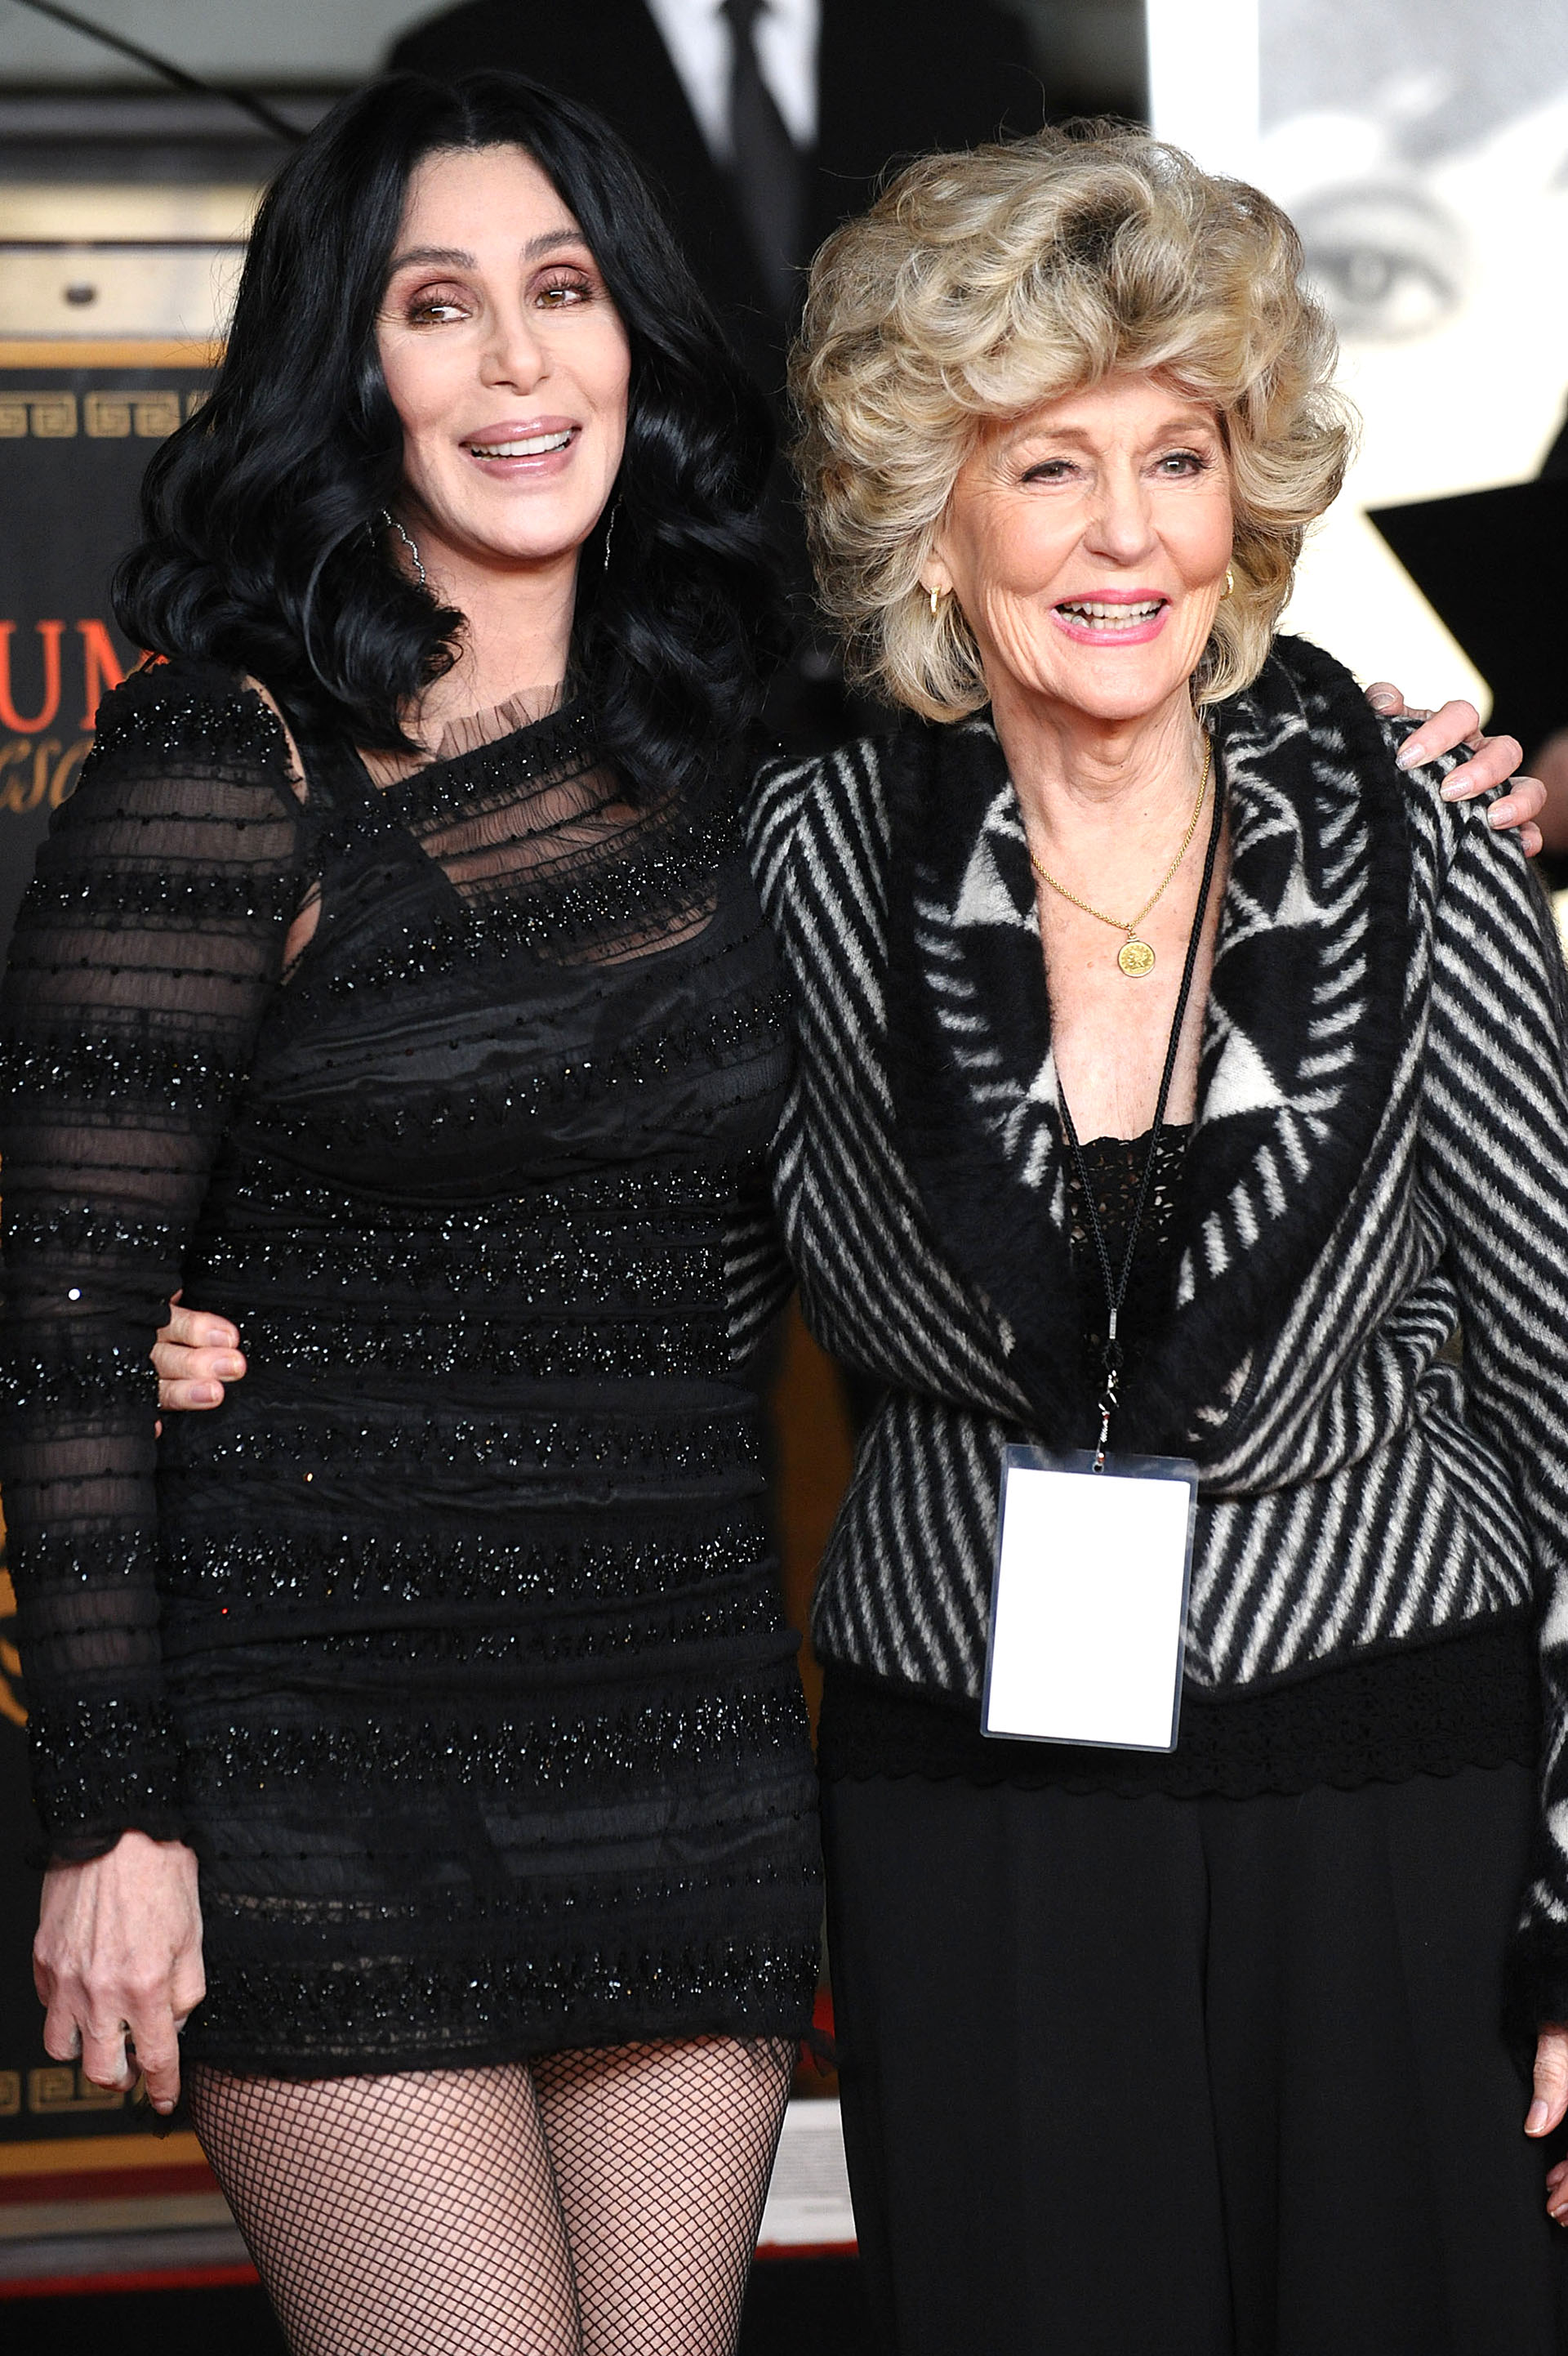 Cher with her mother, actress Georgia Holt, at a Hollywood event in 2010. Cher was 64 and her mother was 84. (Photo by Jason LaVeris/FilmMagic)